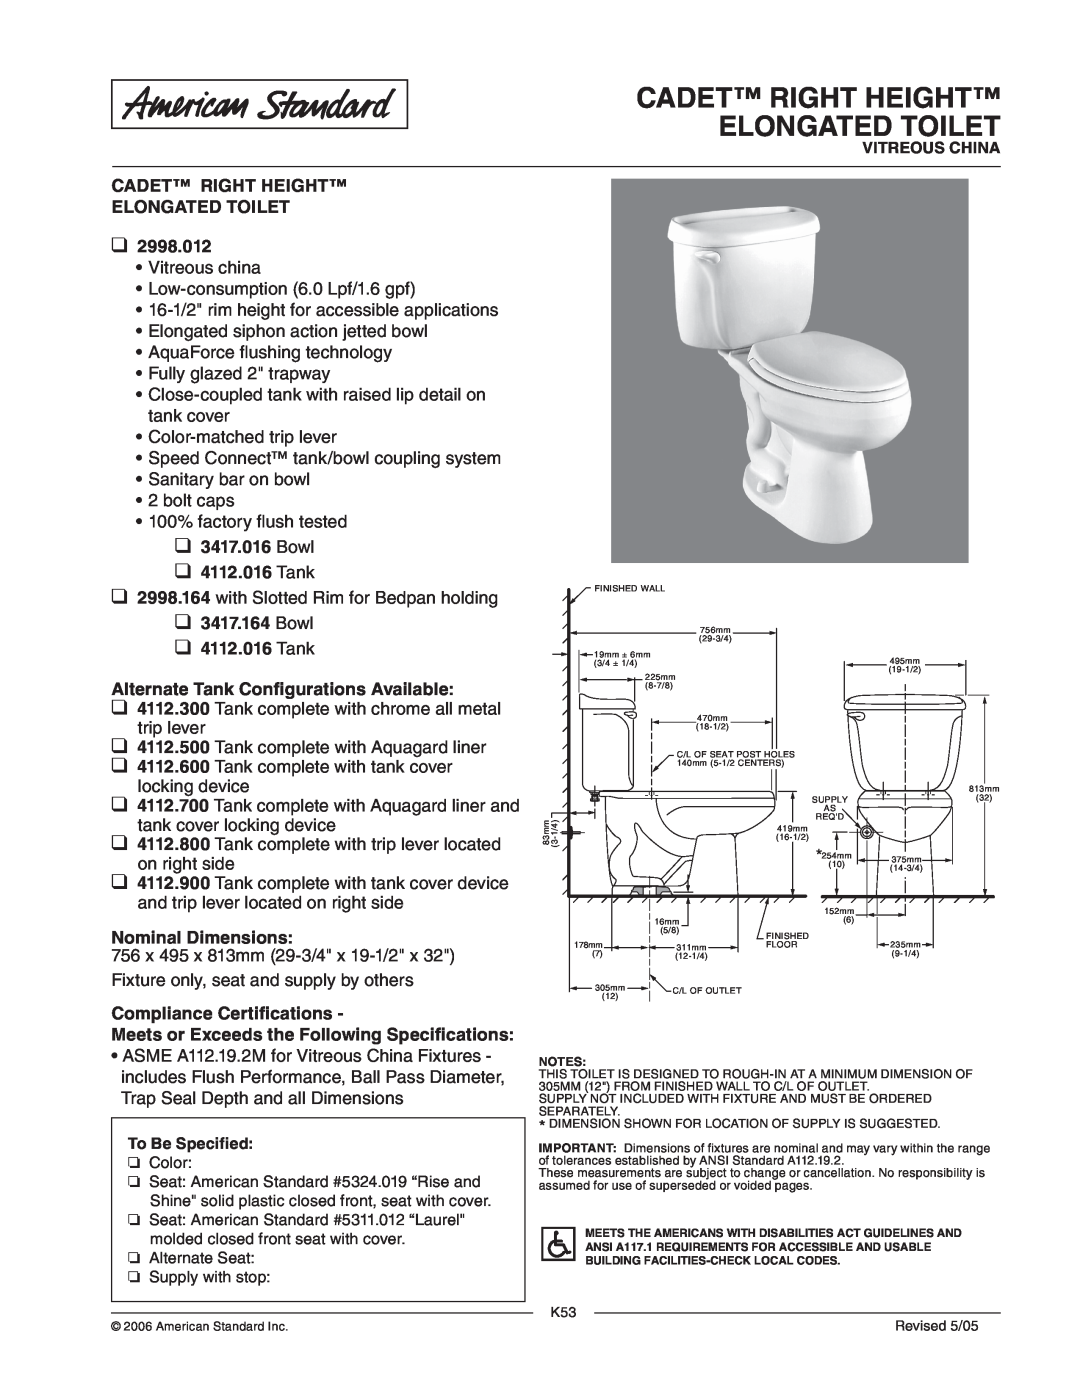 American Standard 2998.012 dimensions Cadet Right Height Elongated Toilet, Bowl 4112.016 Tank, Nominal Dimensions 